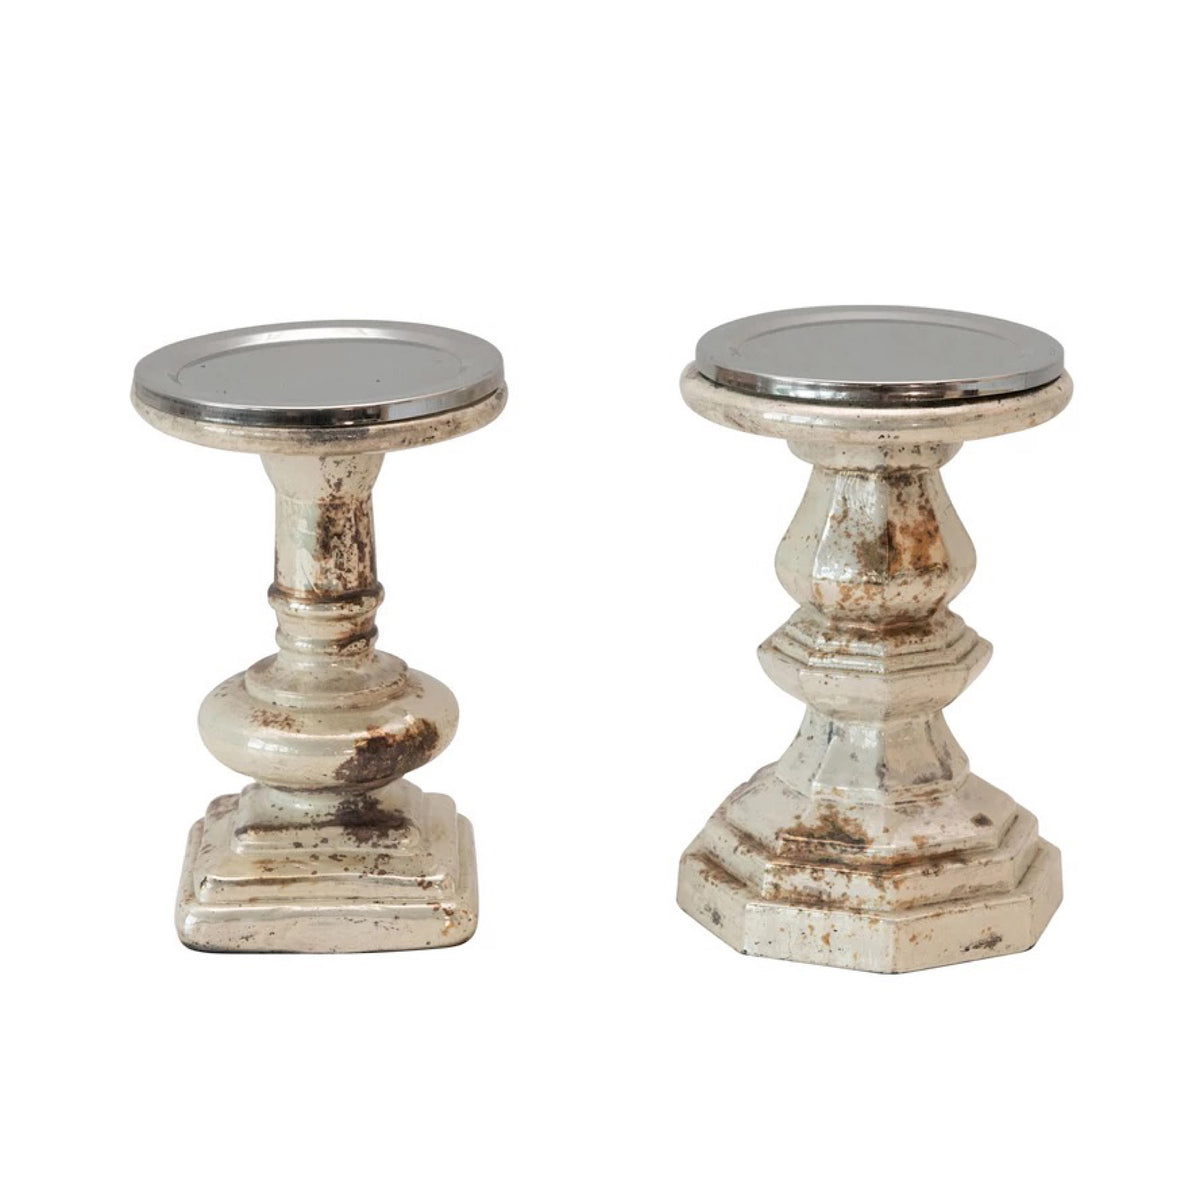 Glass and Metal Candle Holders, 2 Styles